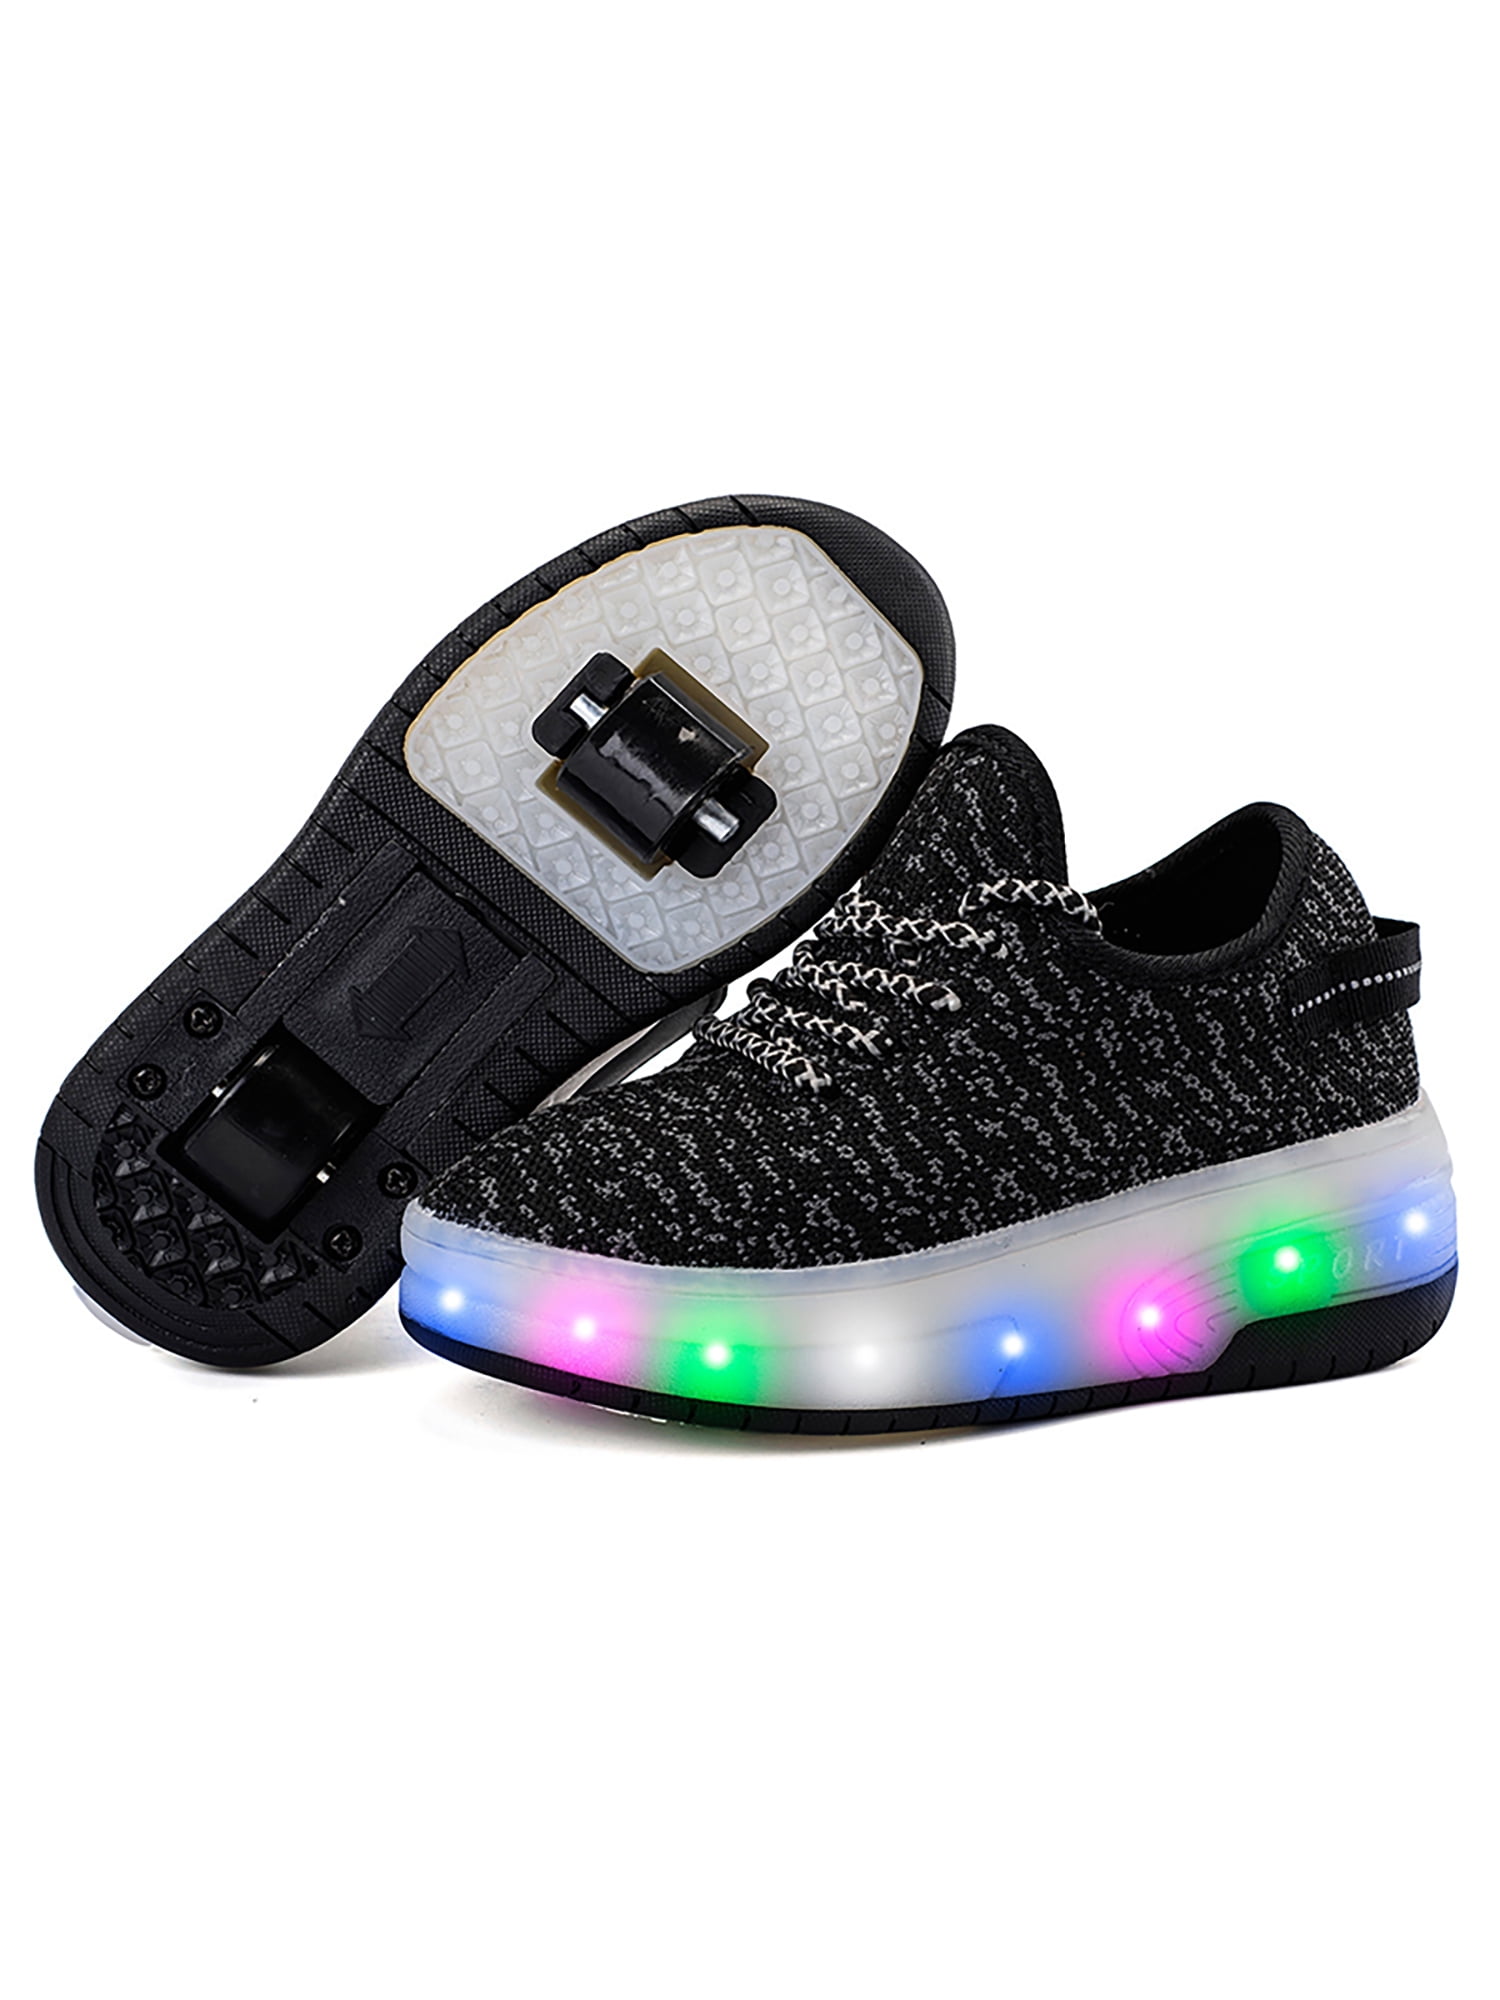 Kids LED Roller Skate Shoes Flashing Casual Sport Sneakers USB Rechargeable 